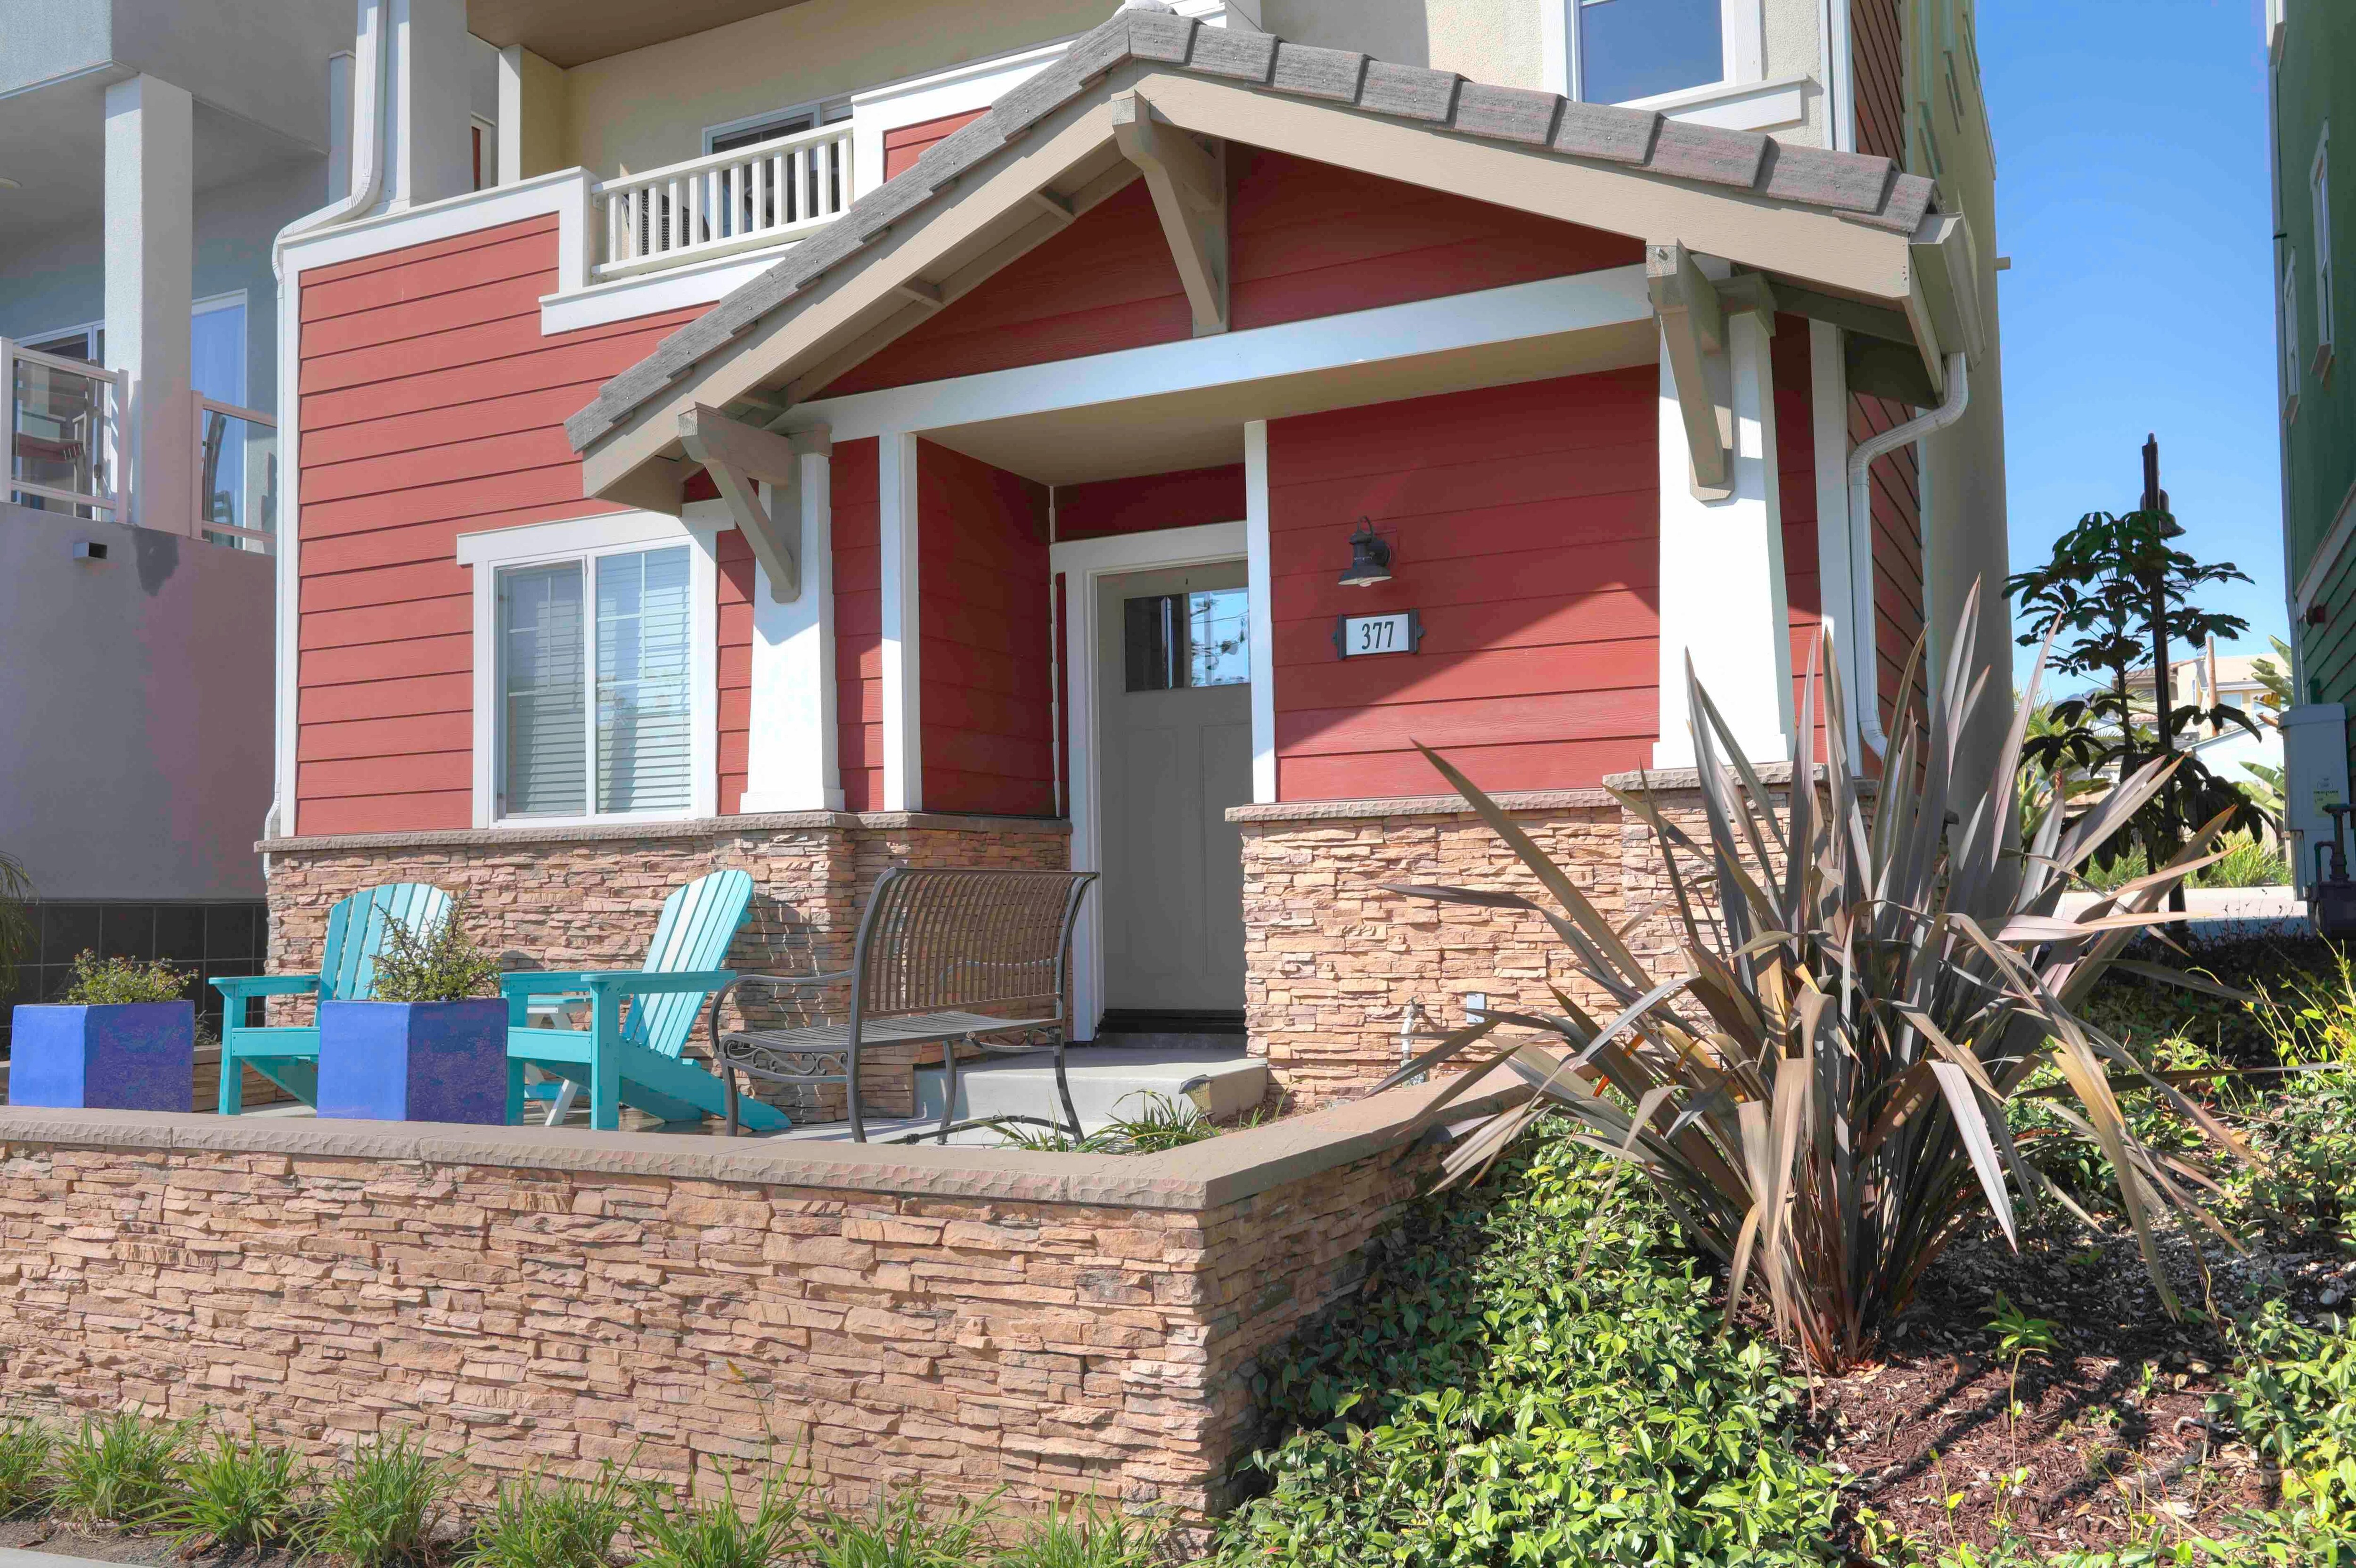 Welcome to Pismo Good Life located on Wadsworth just steps from the Pismo Beach downtown and beach.